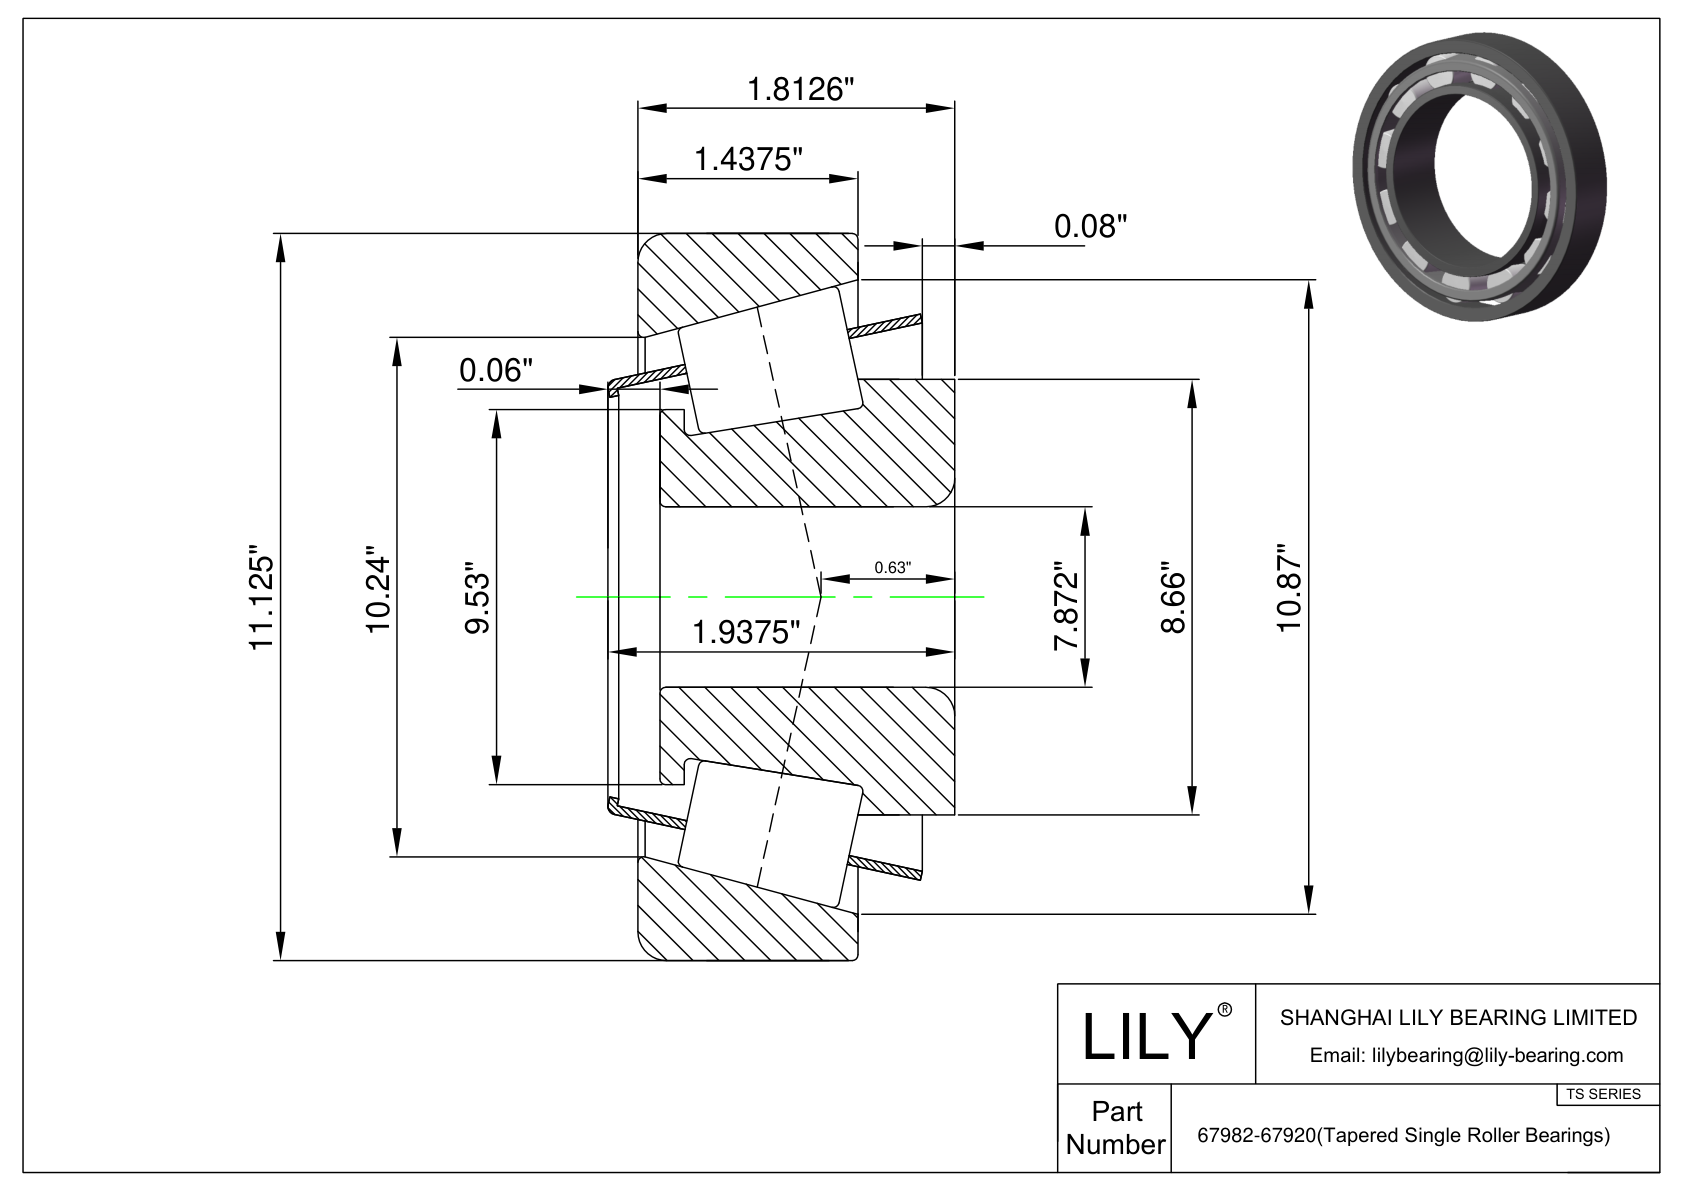 67982-67920 TS (Tapered Single Roller Bearings) (Imperial) cad drawing